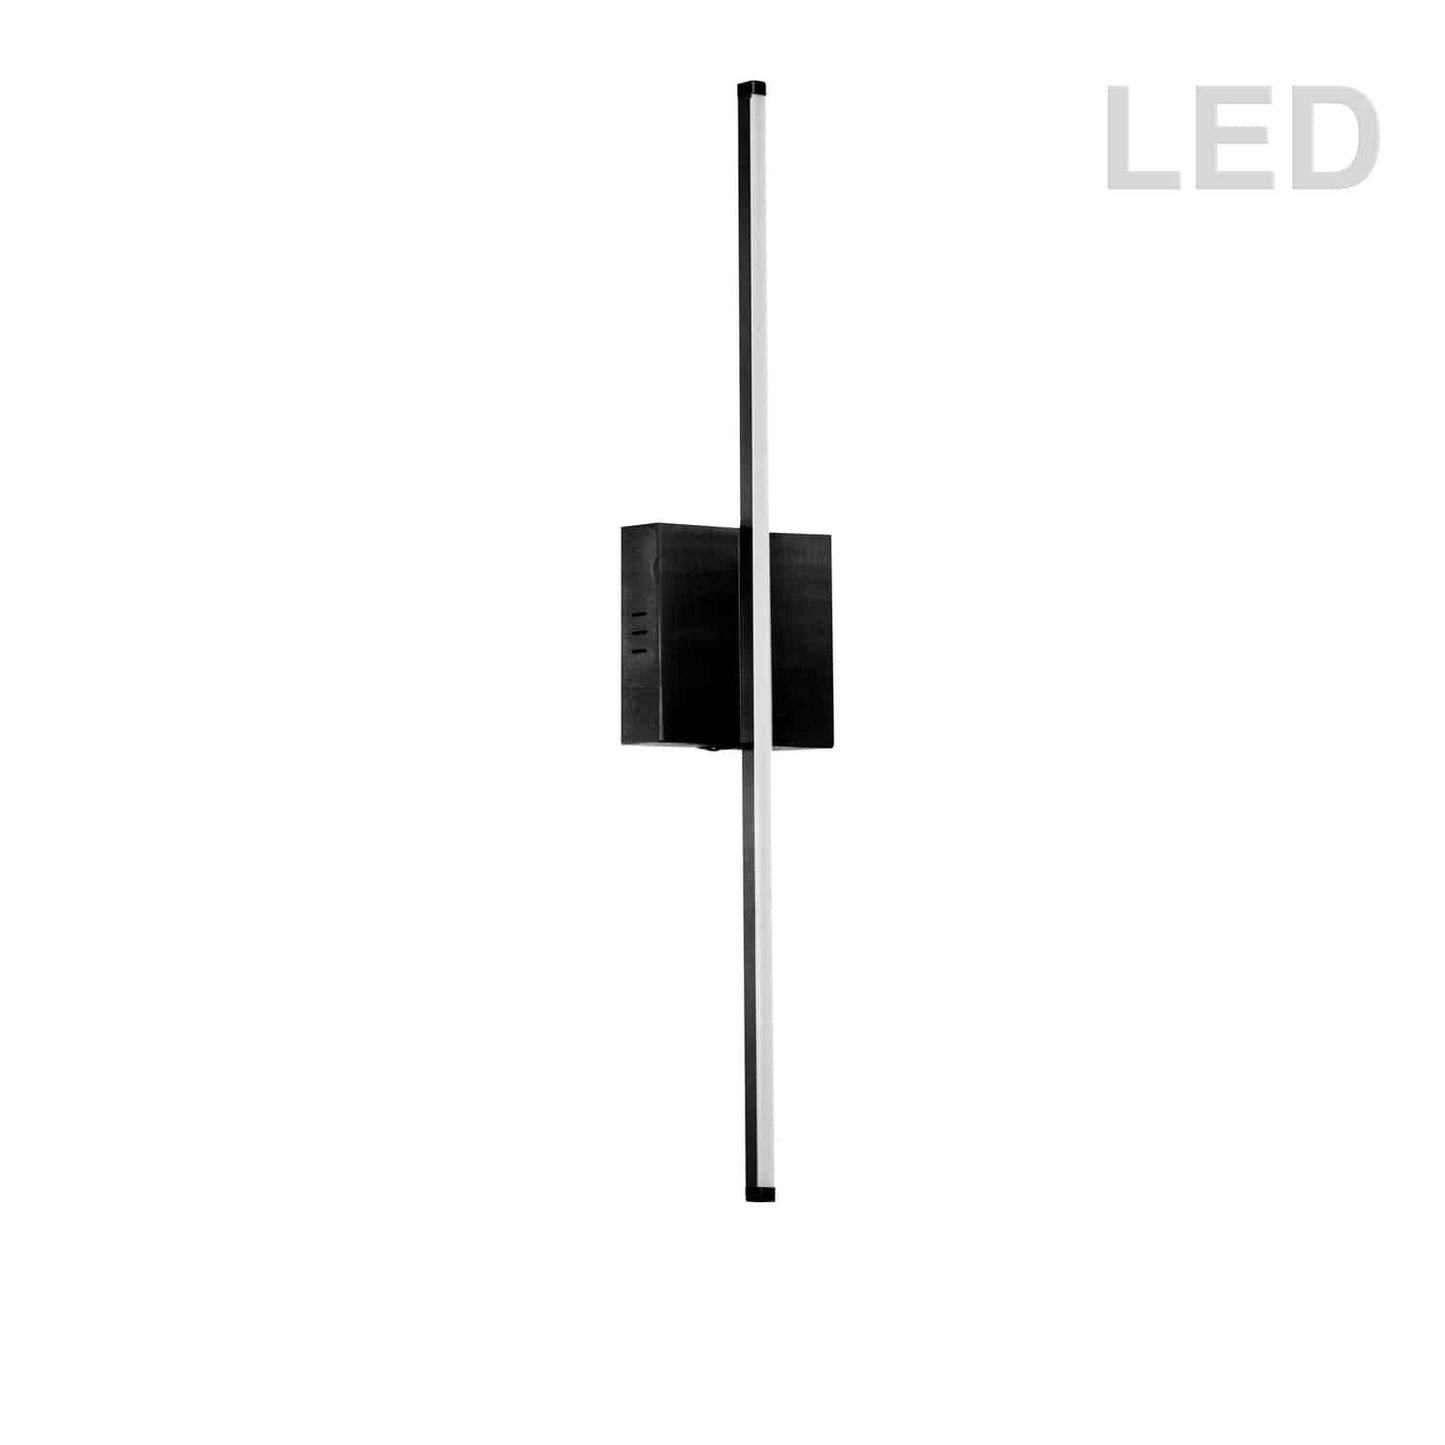 Dainolite ARY-2519LEDW-MB 19W LED Wall Sconce, Matte Black with White Acrylic Diffuser